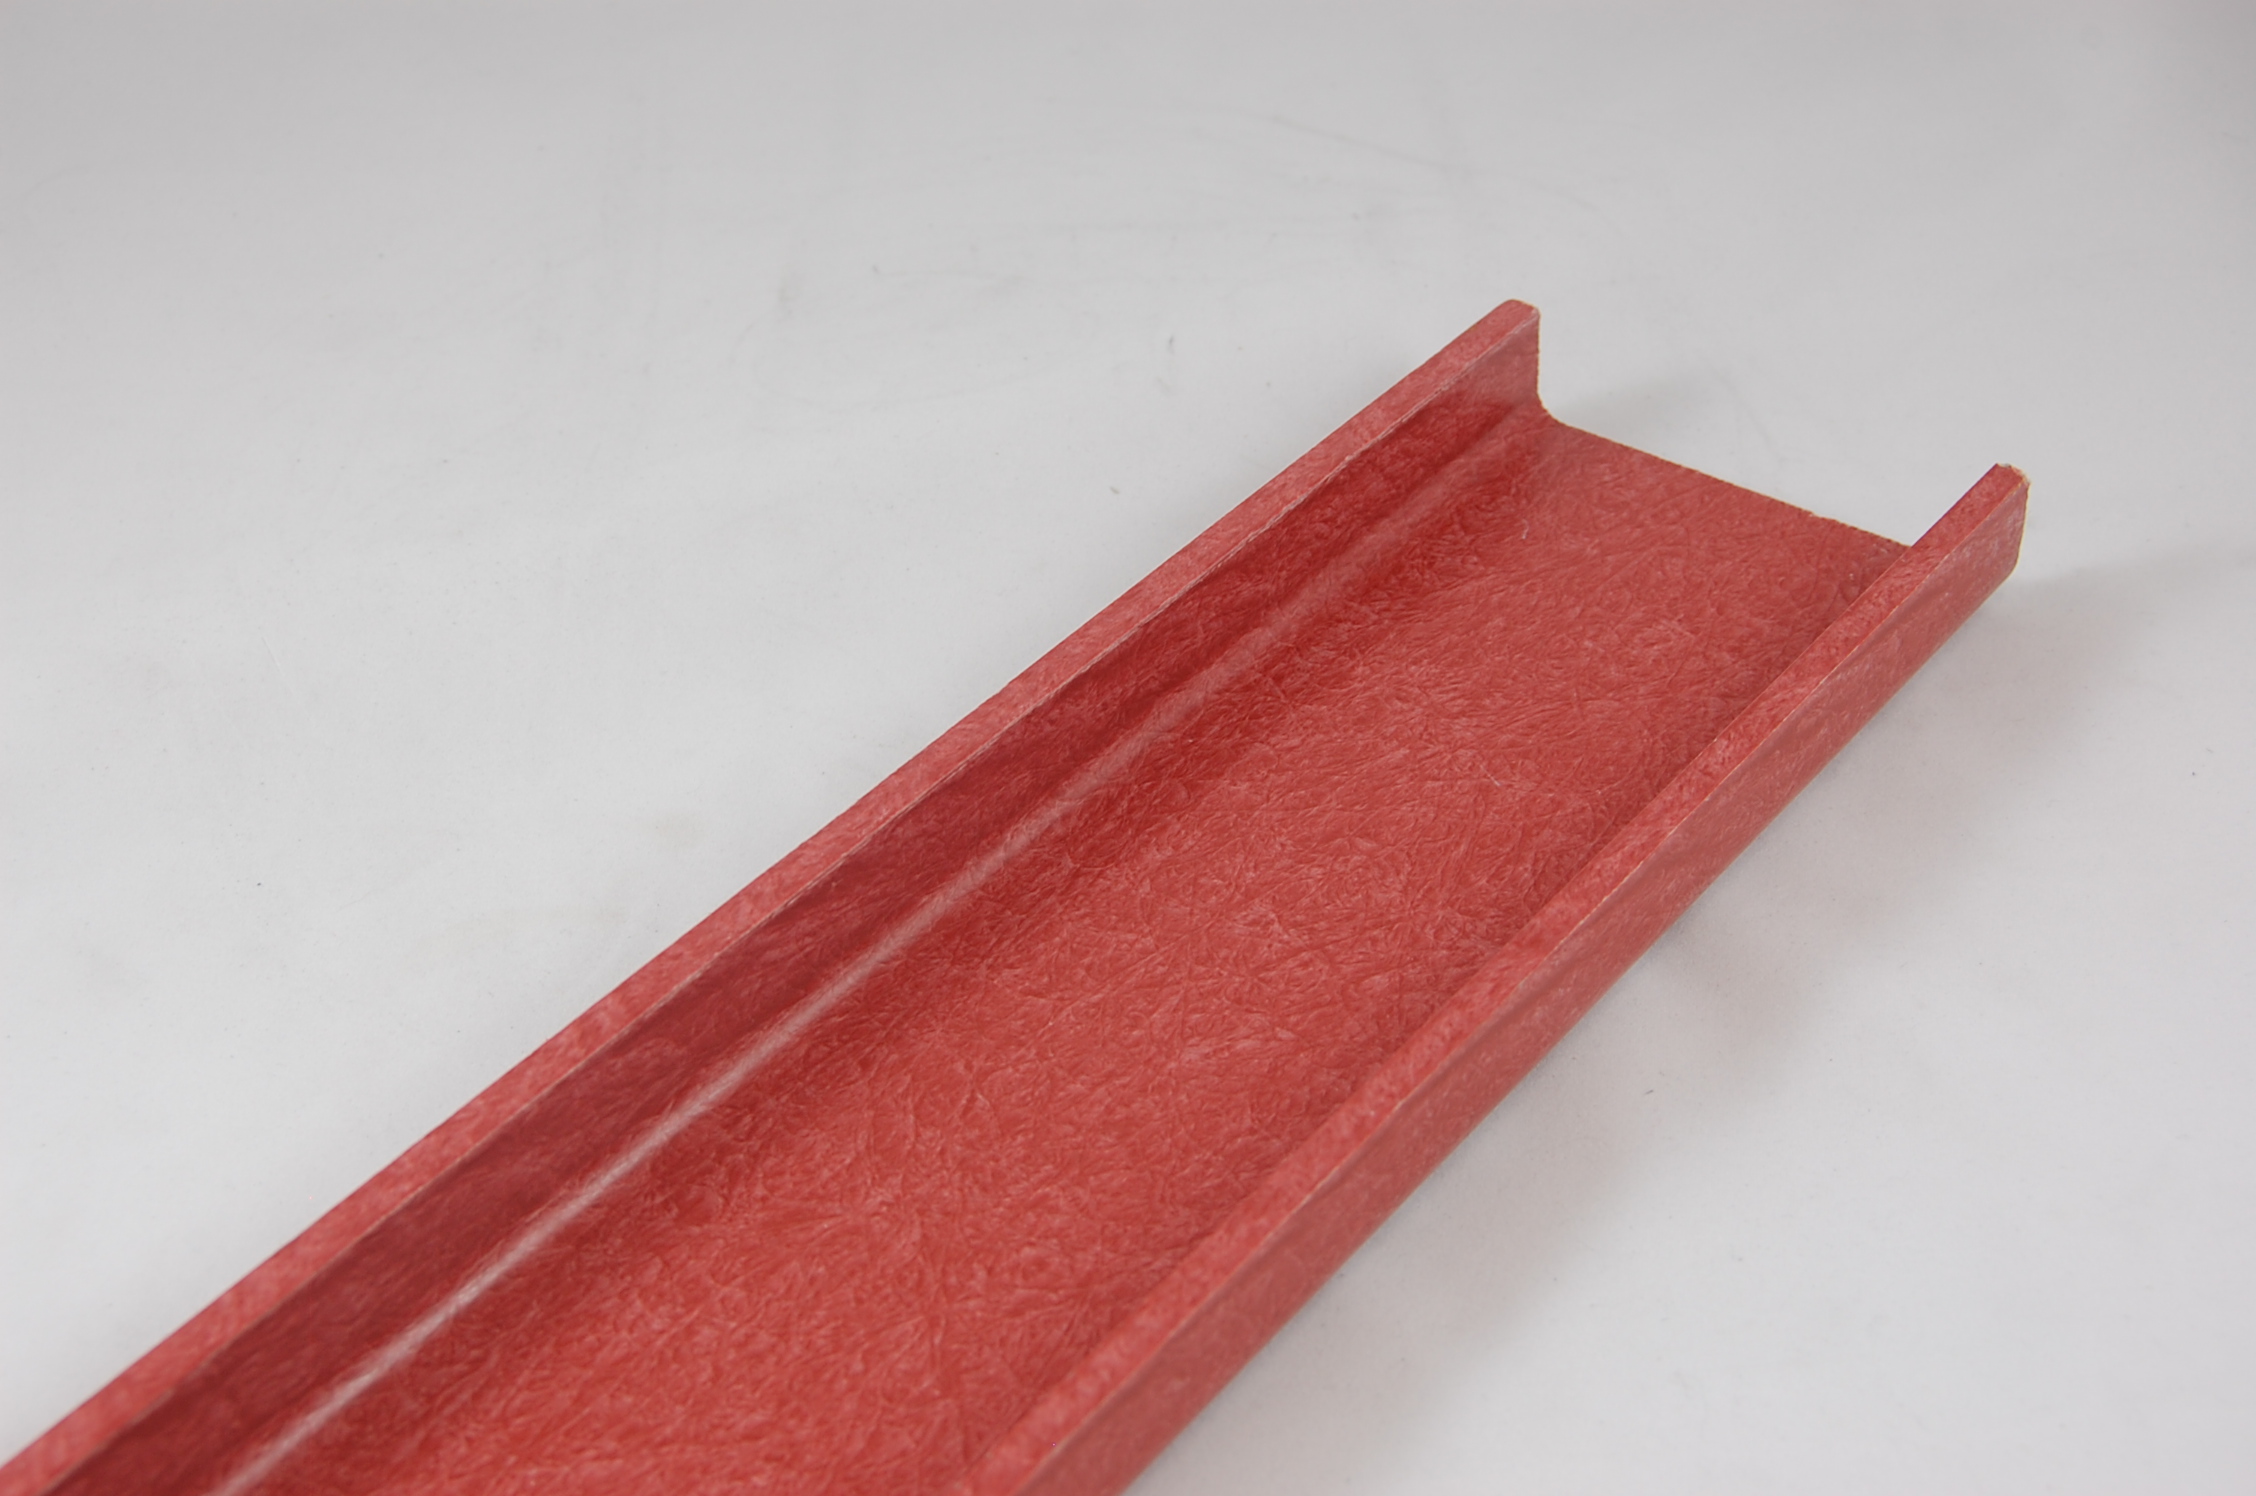 2"W x 1" Leg x 1/4" thick GLASROD® Grade 1130 Fiberglass-Reinforced Polyester Laminate Channel, red,  120"L channel